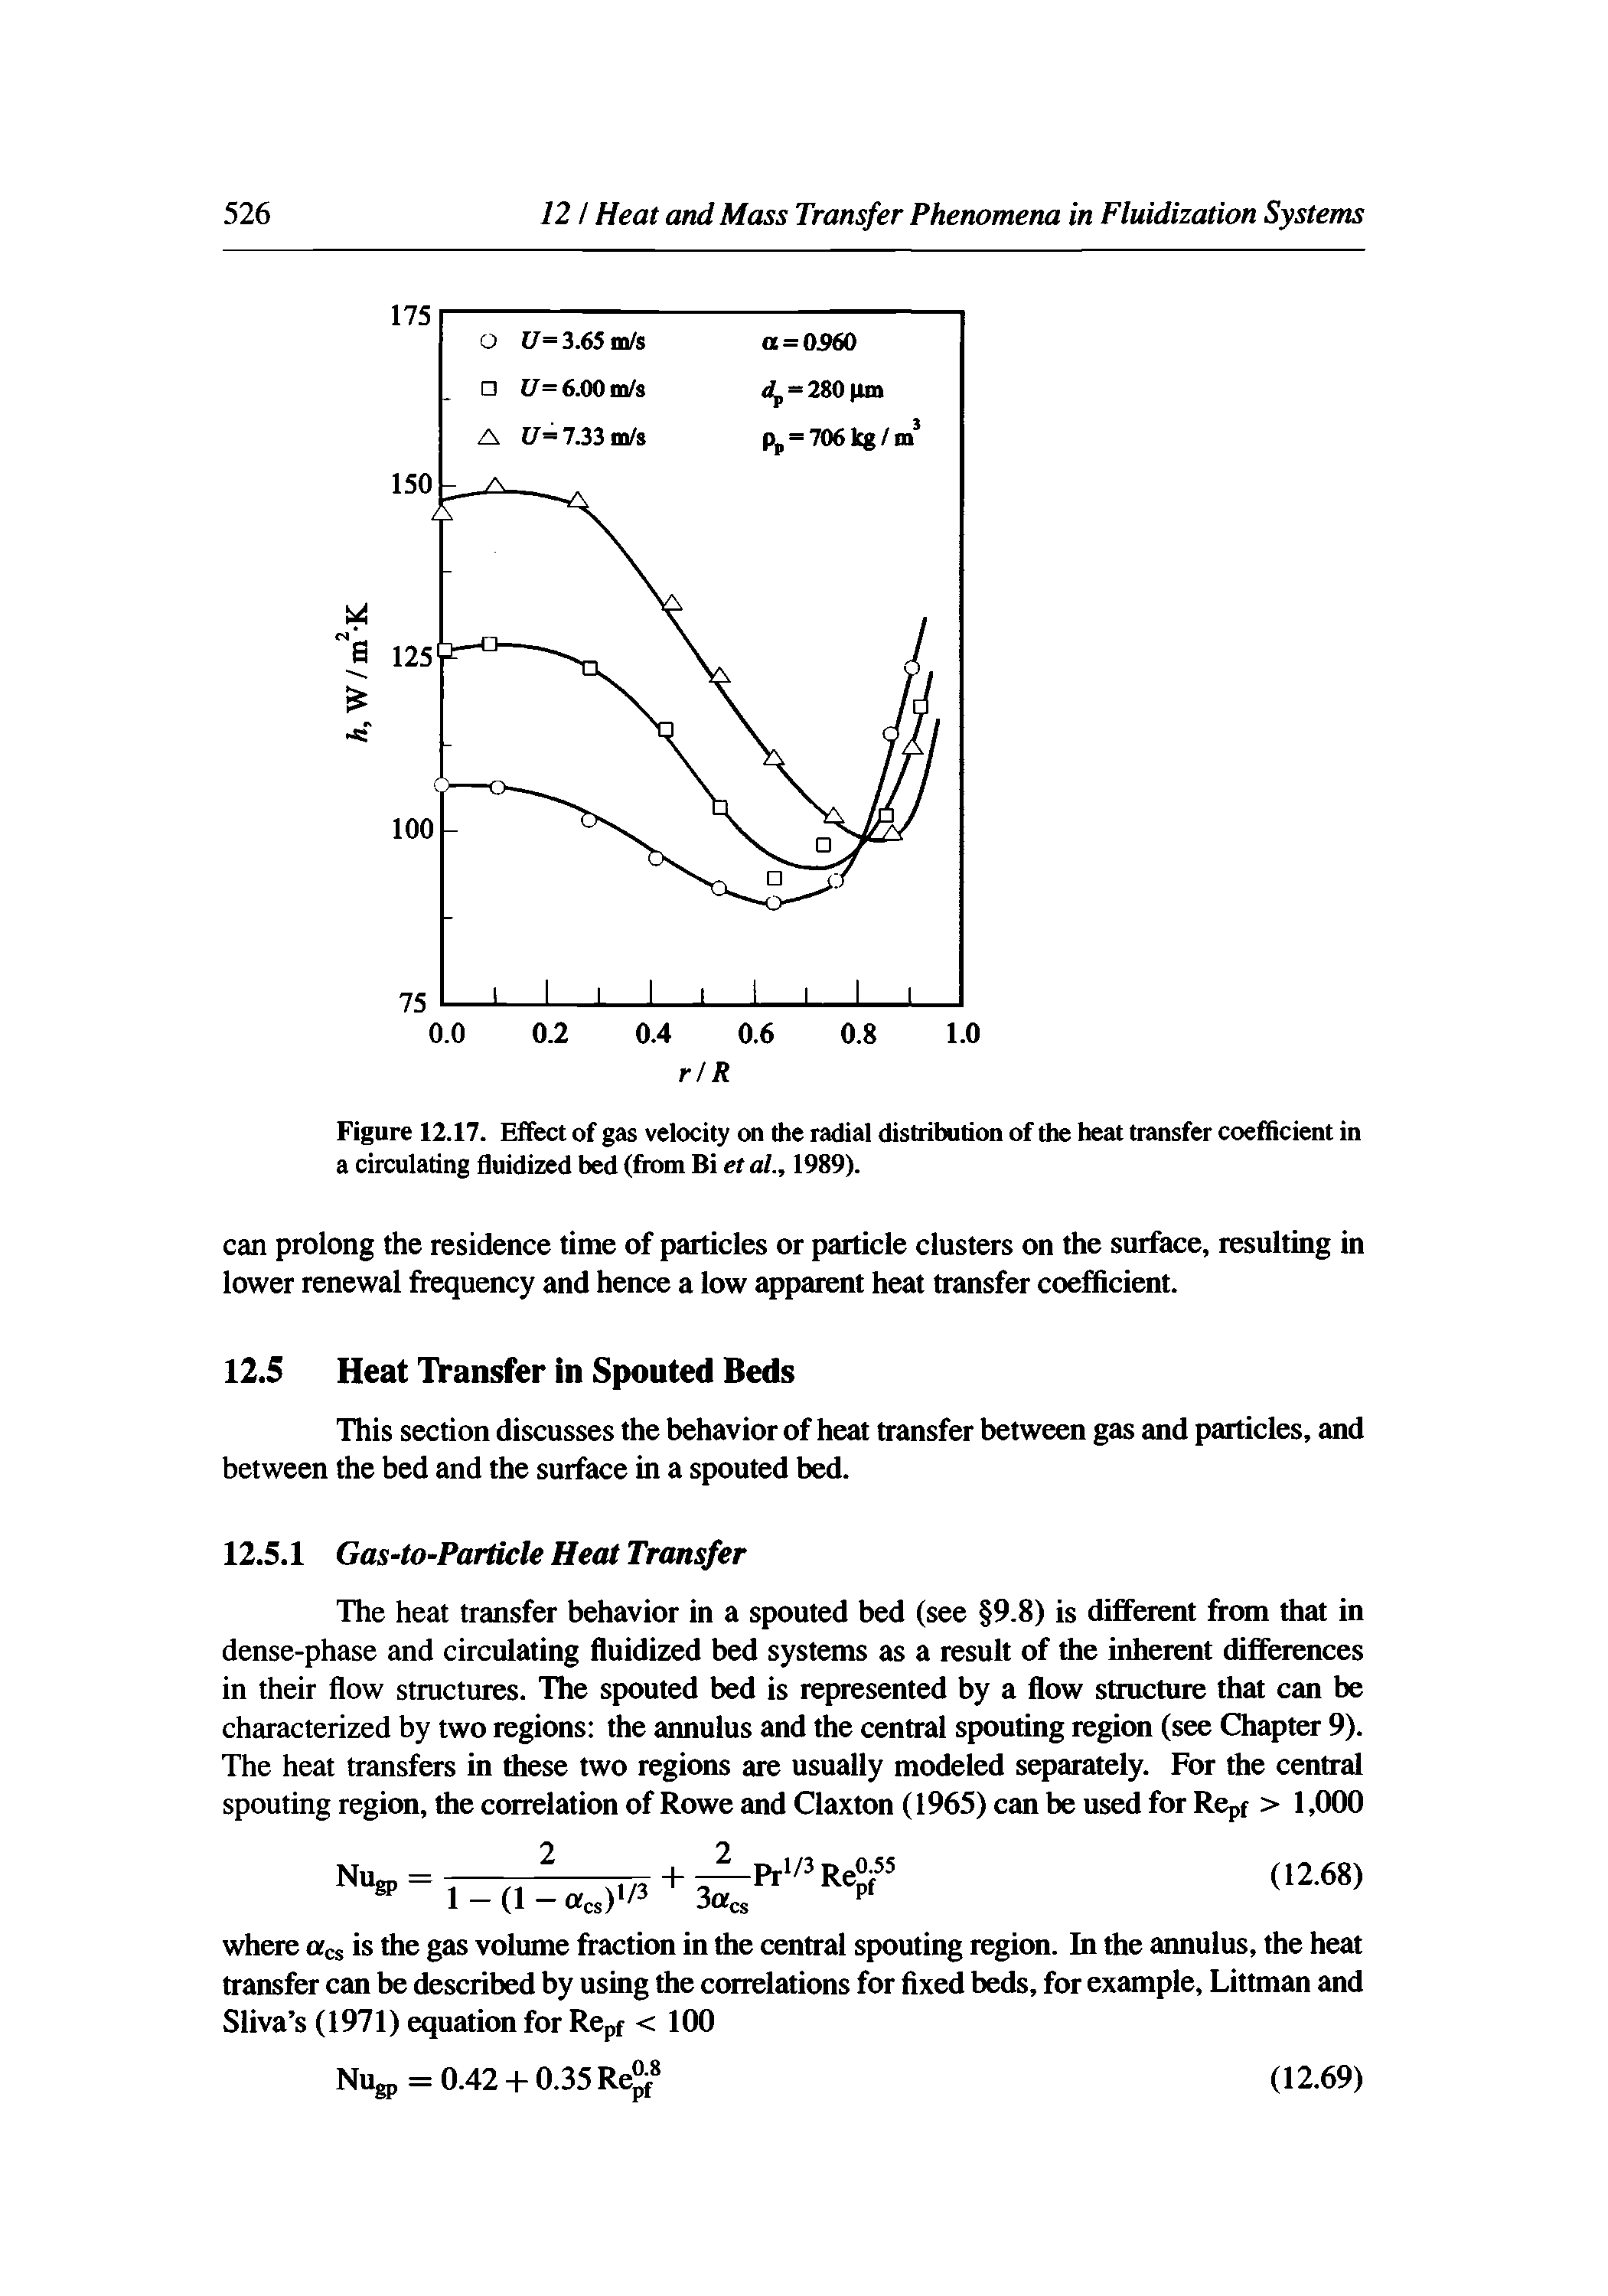 Figure 12.17. Effect of gas velocity on the radial distribution of the heat transfer coefficient in a circulating fluidized bed (from Bi et at., 1989).